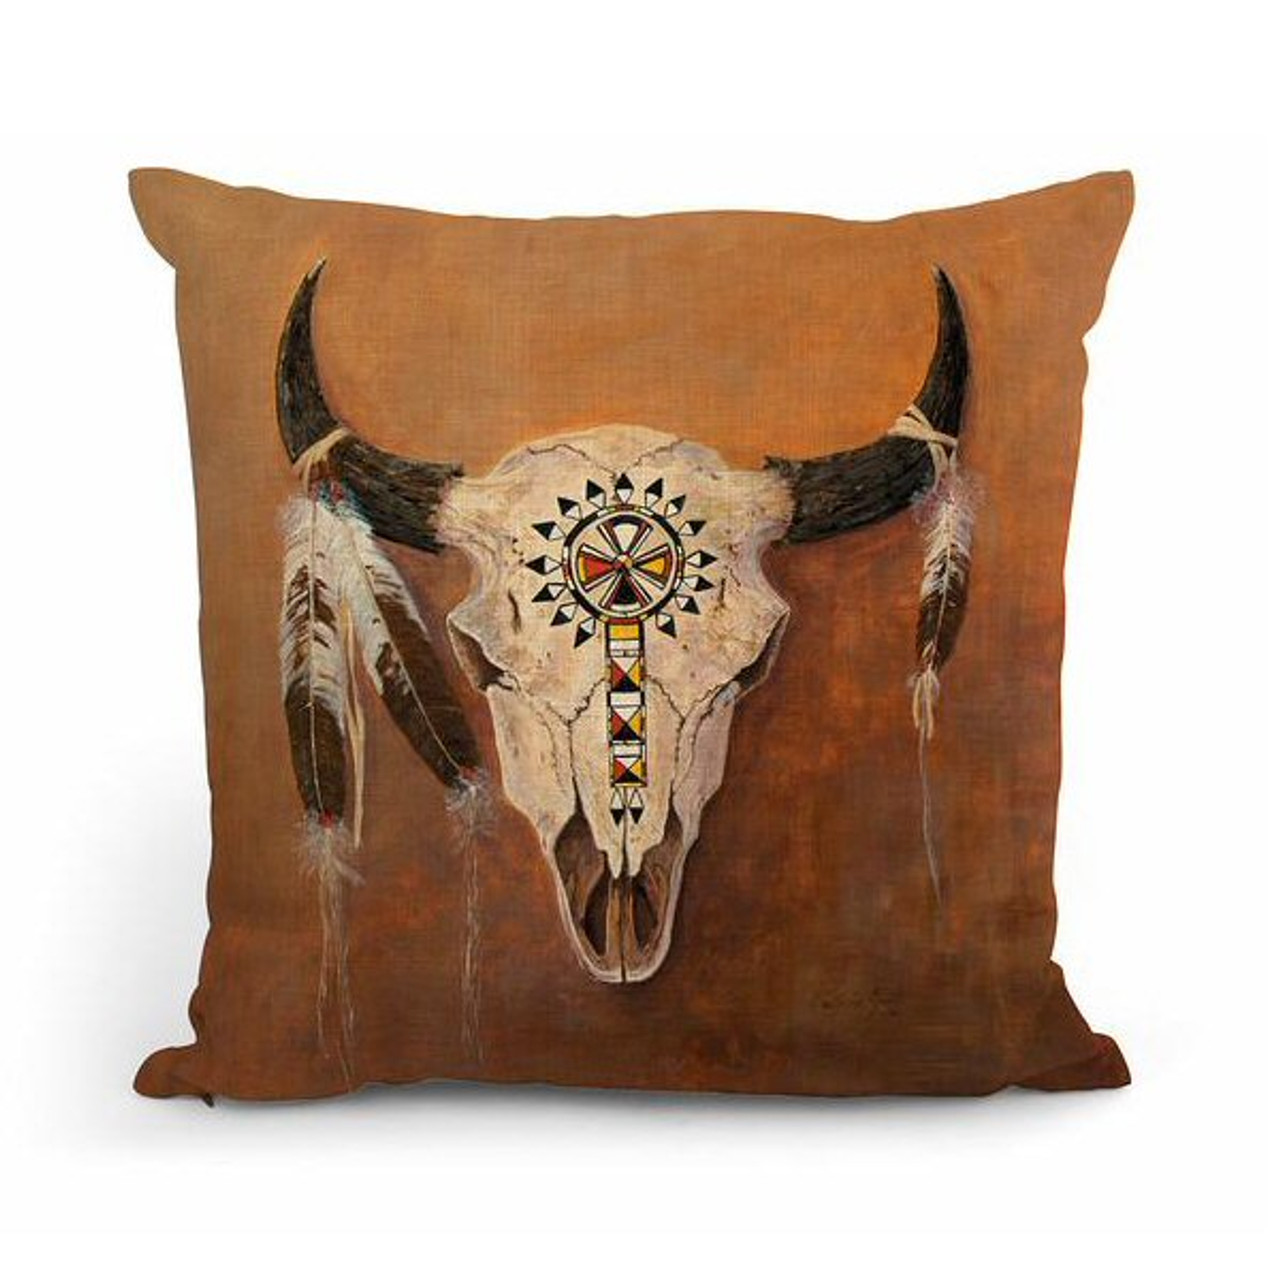 18 Big Medicine Buffalo Skull Decorative Square Throw Pillows, Set of 4 - Accent  Pillow - Wild Wings